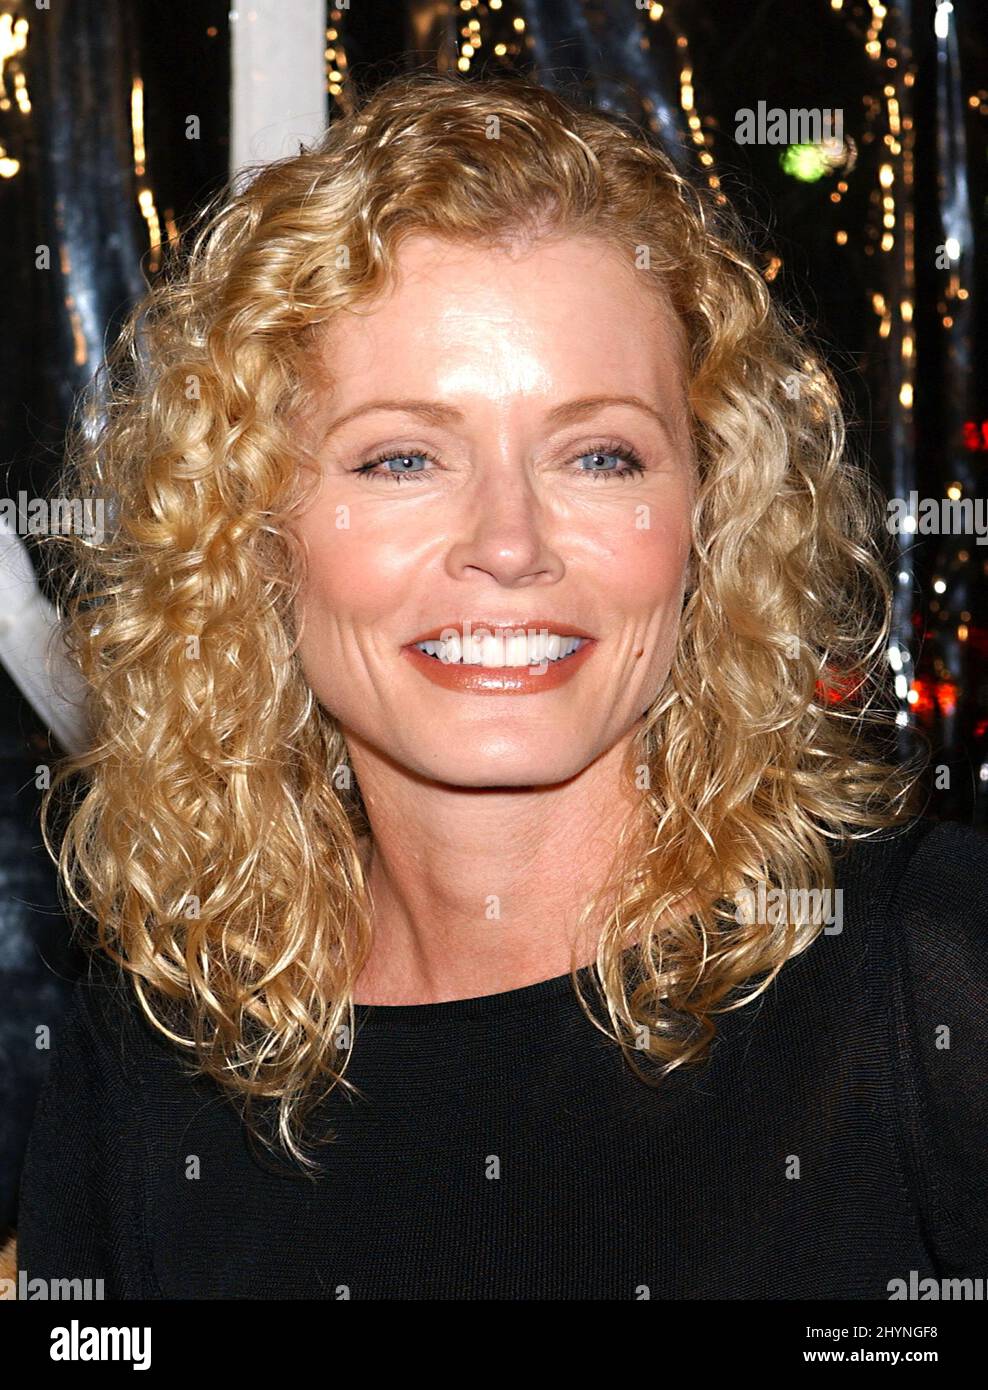 SHEREE J. WILSON ATTENDS THE 'COLD MOUNTAIN' PREMIERE IN WESTWOOD, CALIFORNIA. PICTURE: UK PRESS Stock Photo